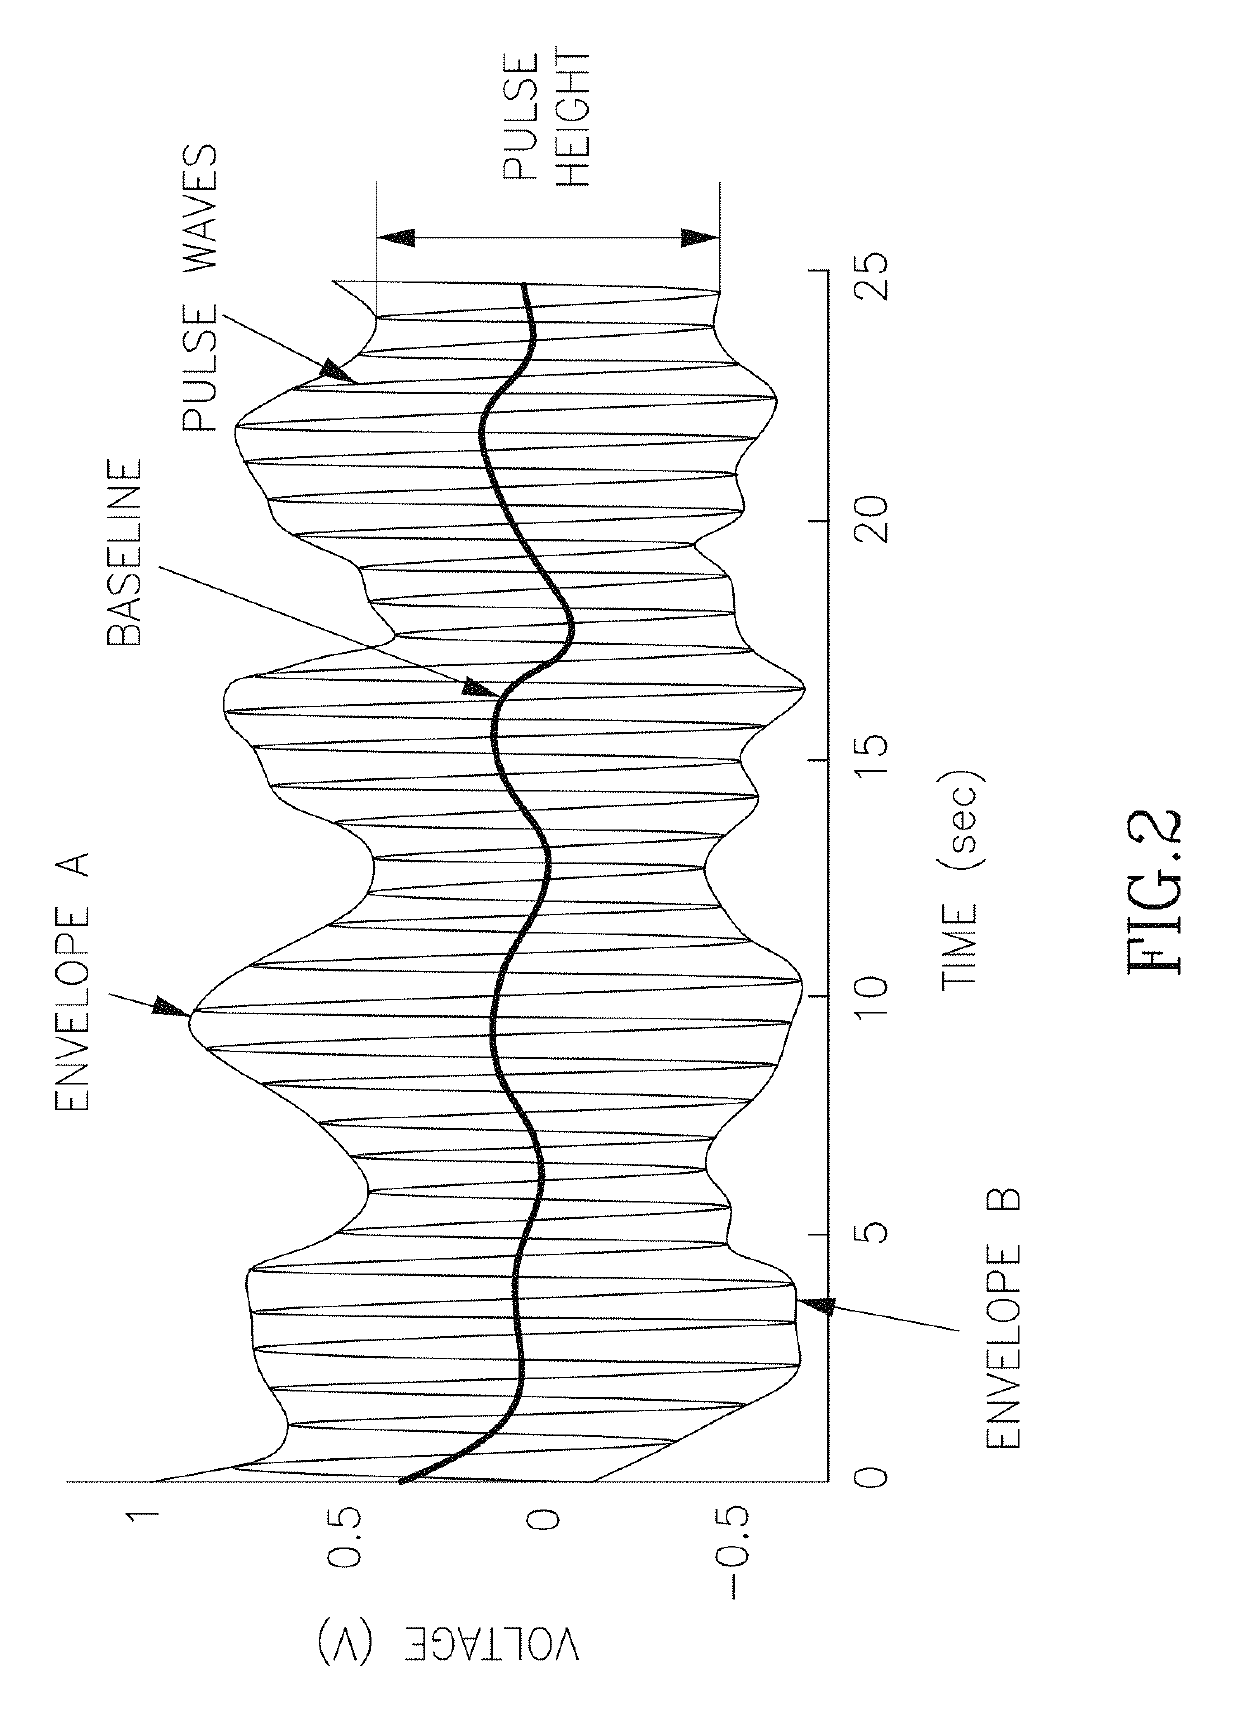 Method and apparatus for non-invasive detection of physiological and patho-physiological sleep conditions